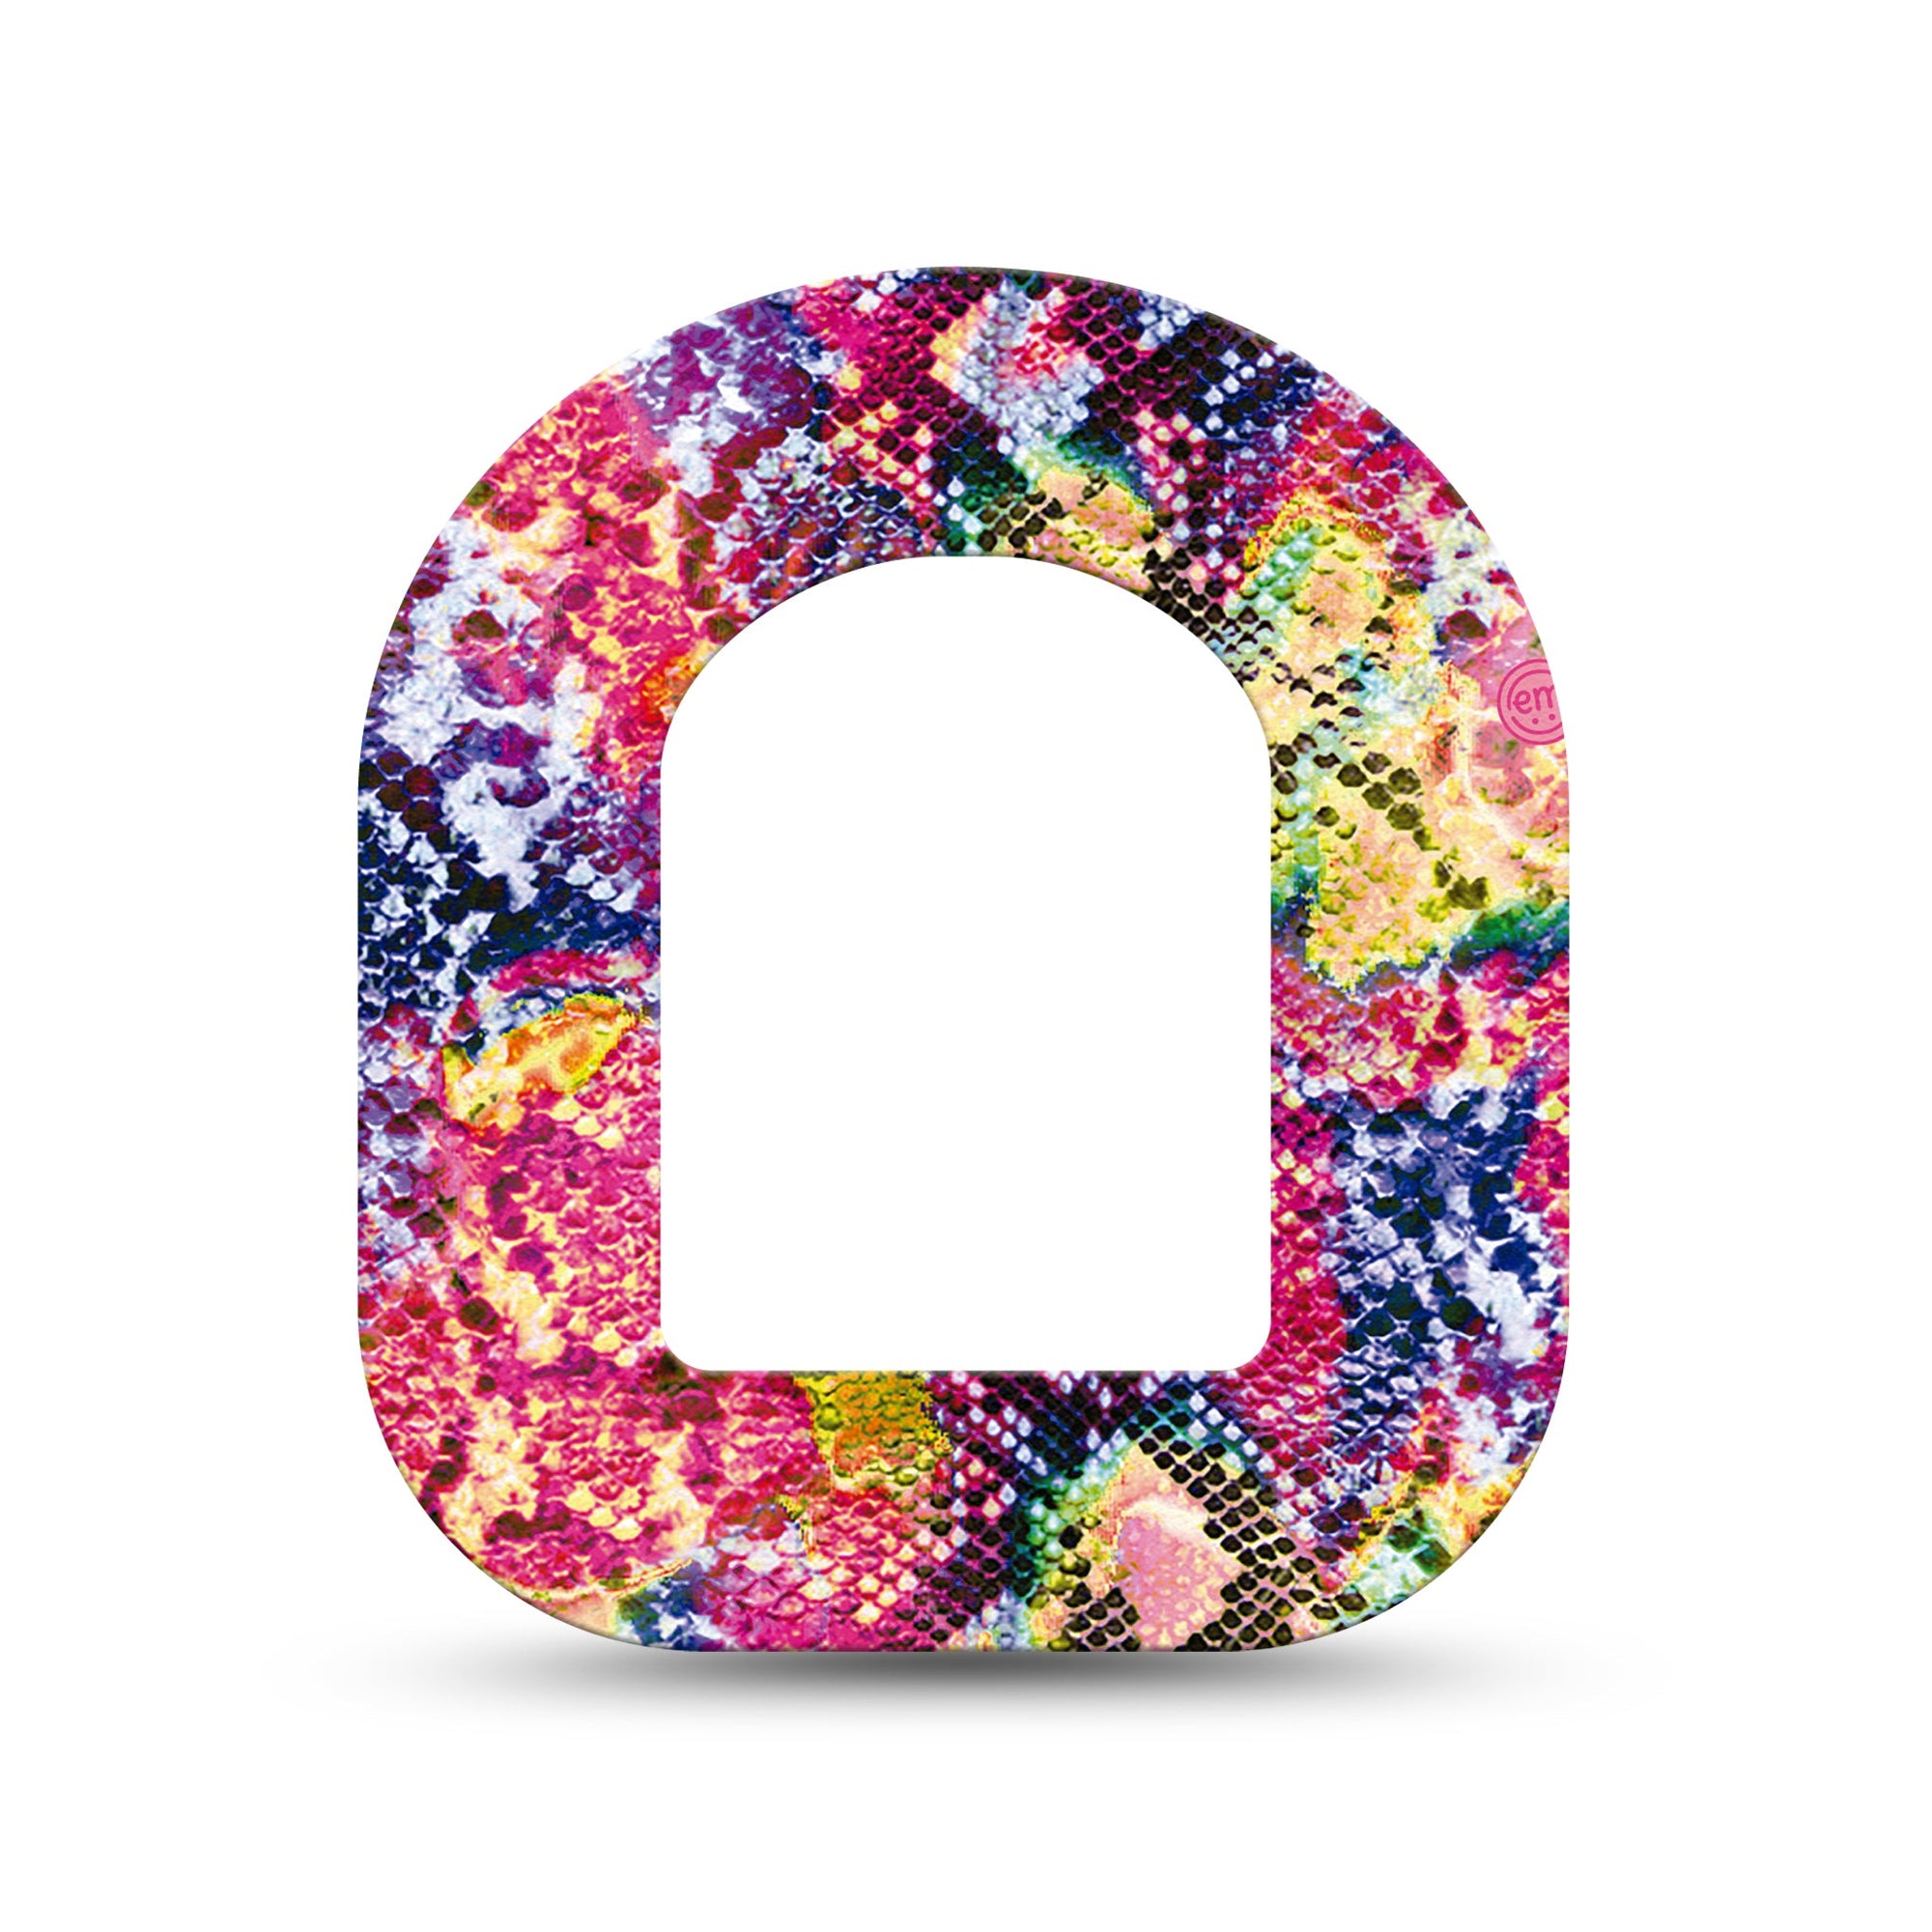 ExpressionMed Rainbow Snakeskin Pod Mini Tape Single, Colorful Scales Plaster Pump Design